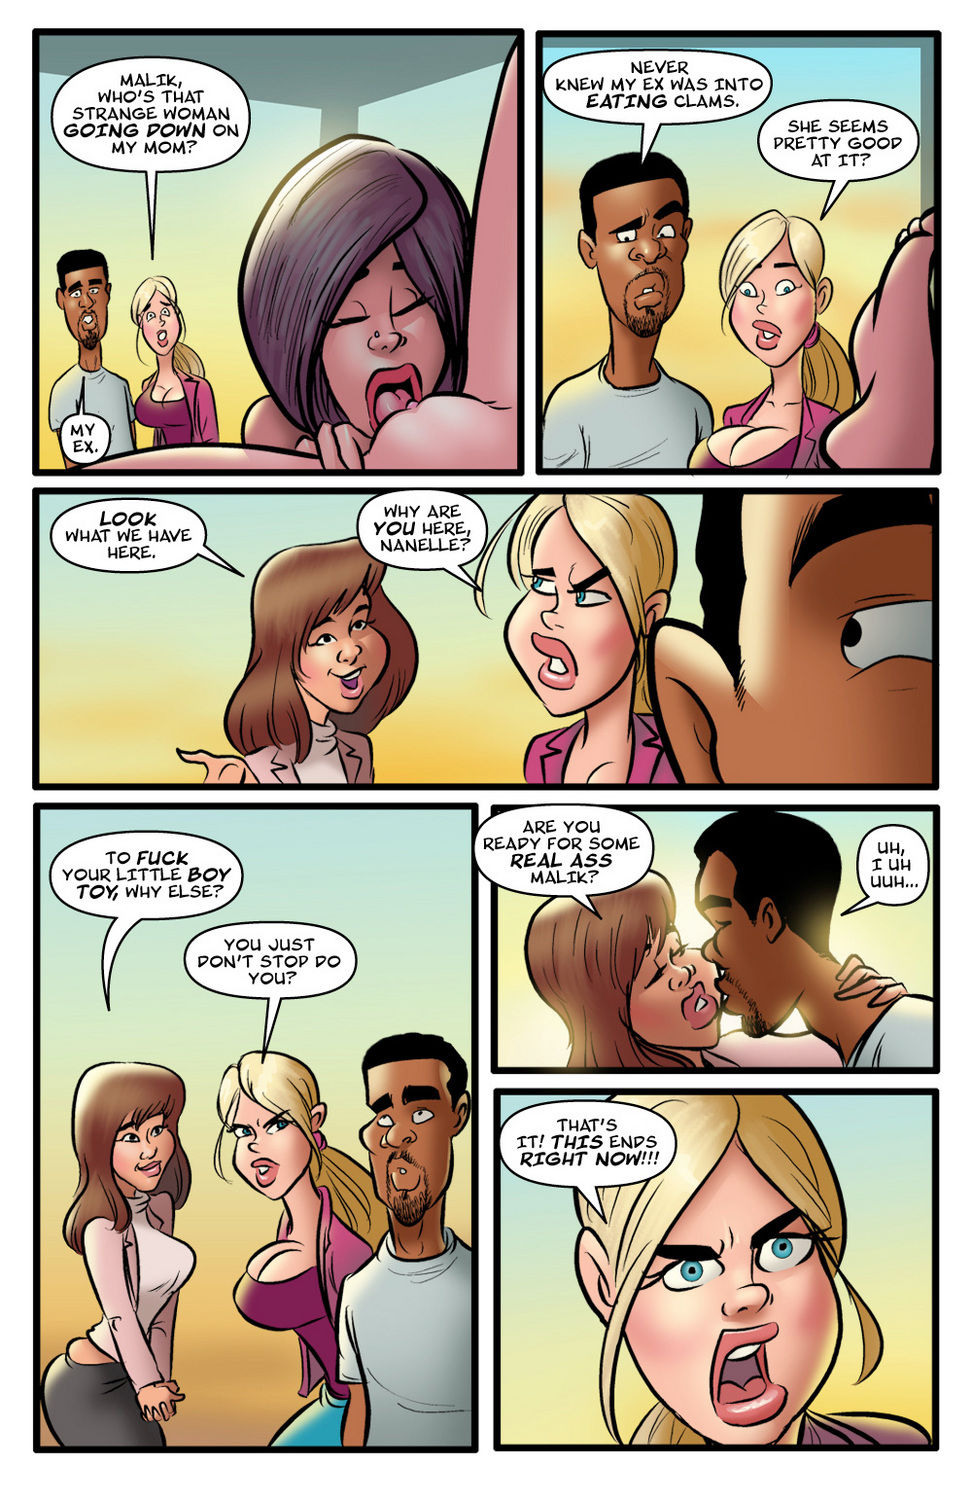 A BackDoor To Heaven 3 - John Persons page 9